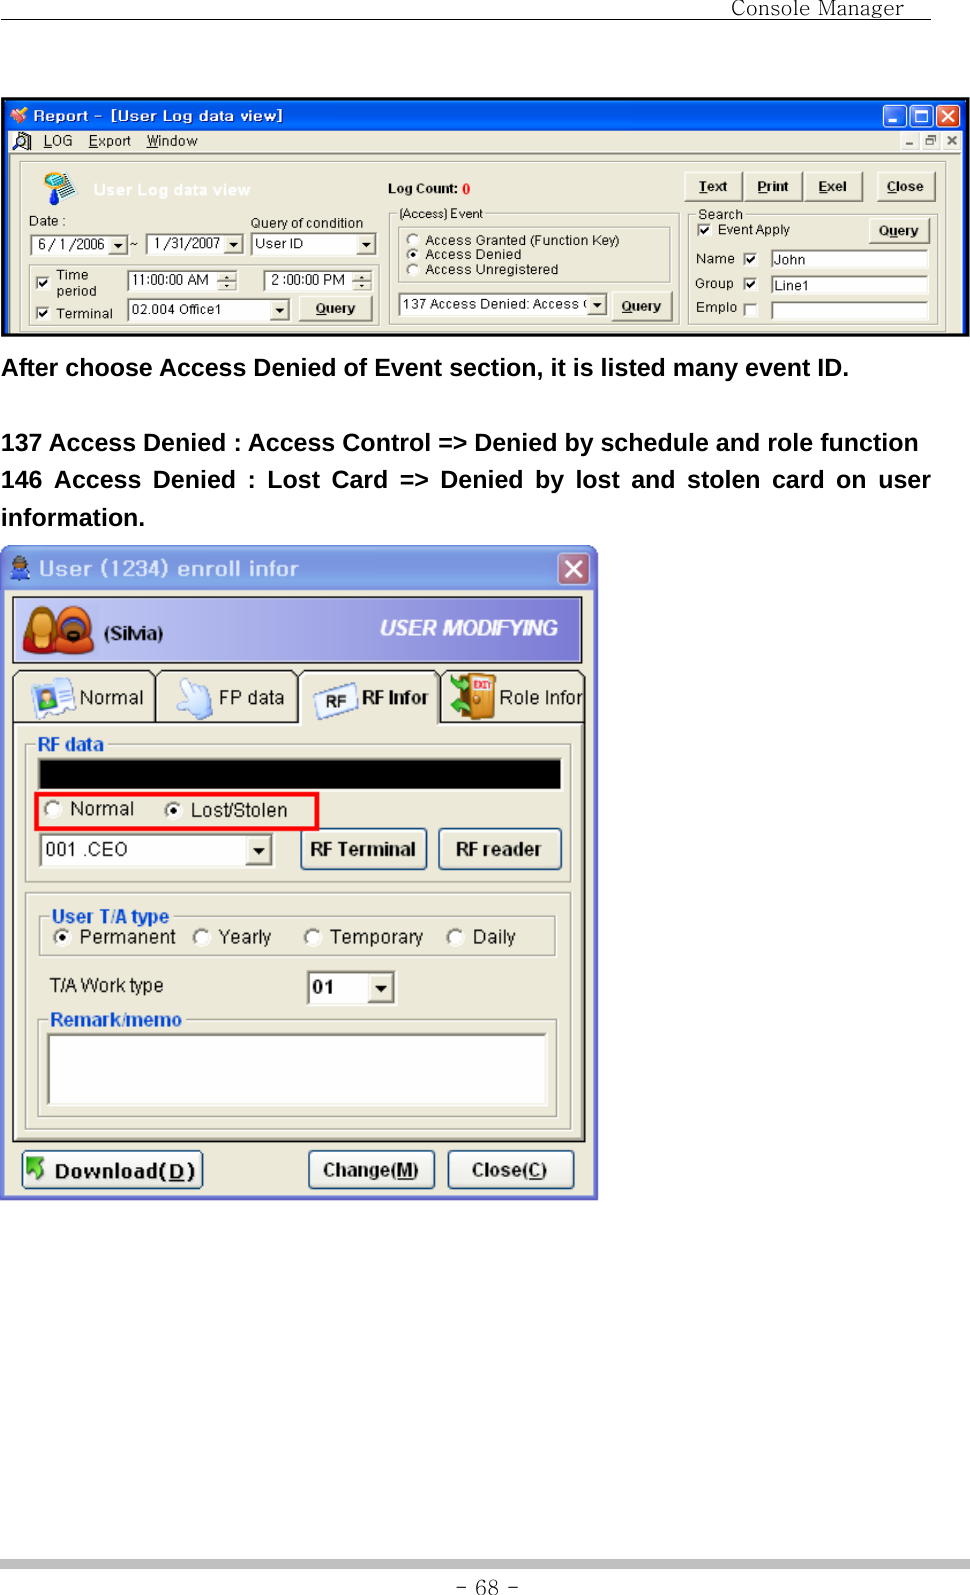                                Console Manager               - 68 - After choose Access Denied of Event section, it is listed many event ID.  137 Access Denied : Access Control =&gt; Denied by schedule and role function 146 Access Denied : Lost Card =&gt; Denied by lost and stolen card on user information.        